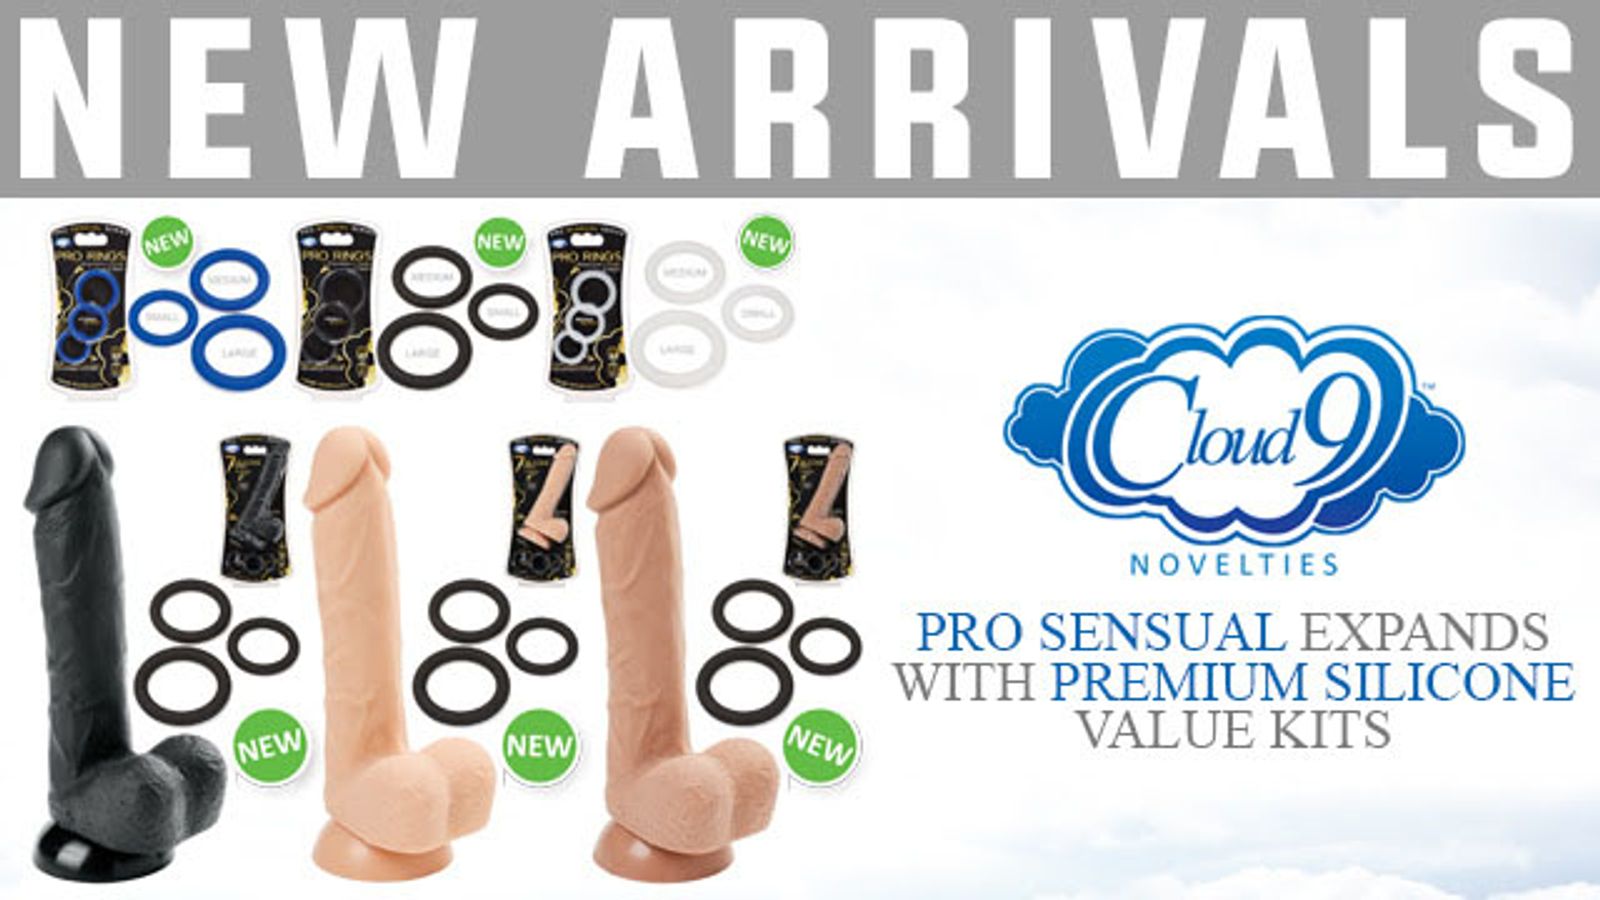 Kits Added To Cloud 9 Pro Sensual Line, Available From Williams Trading